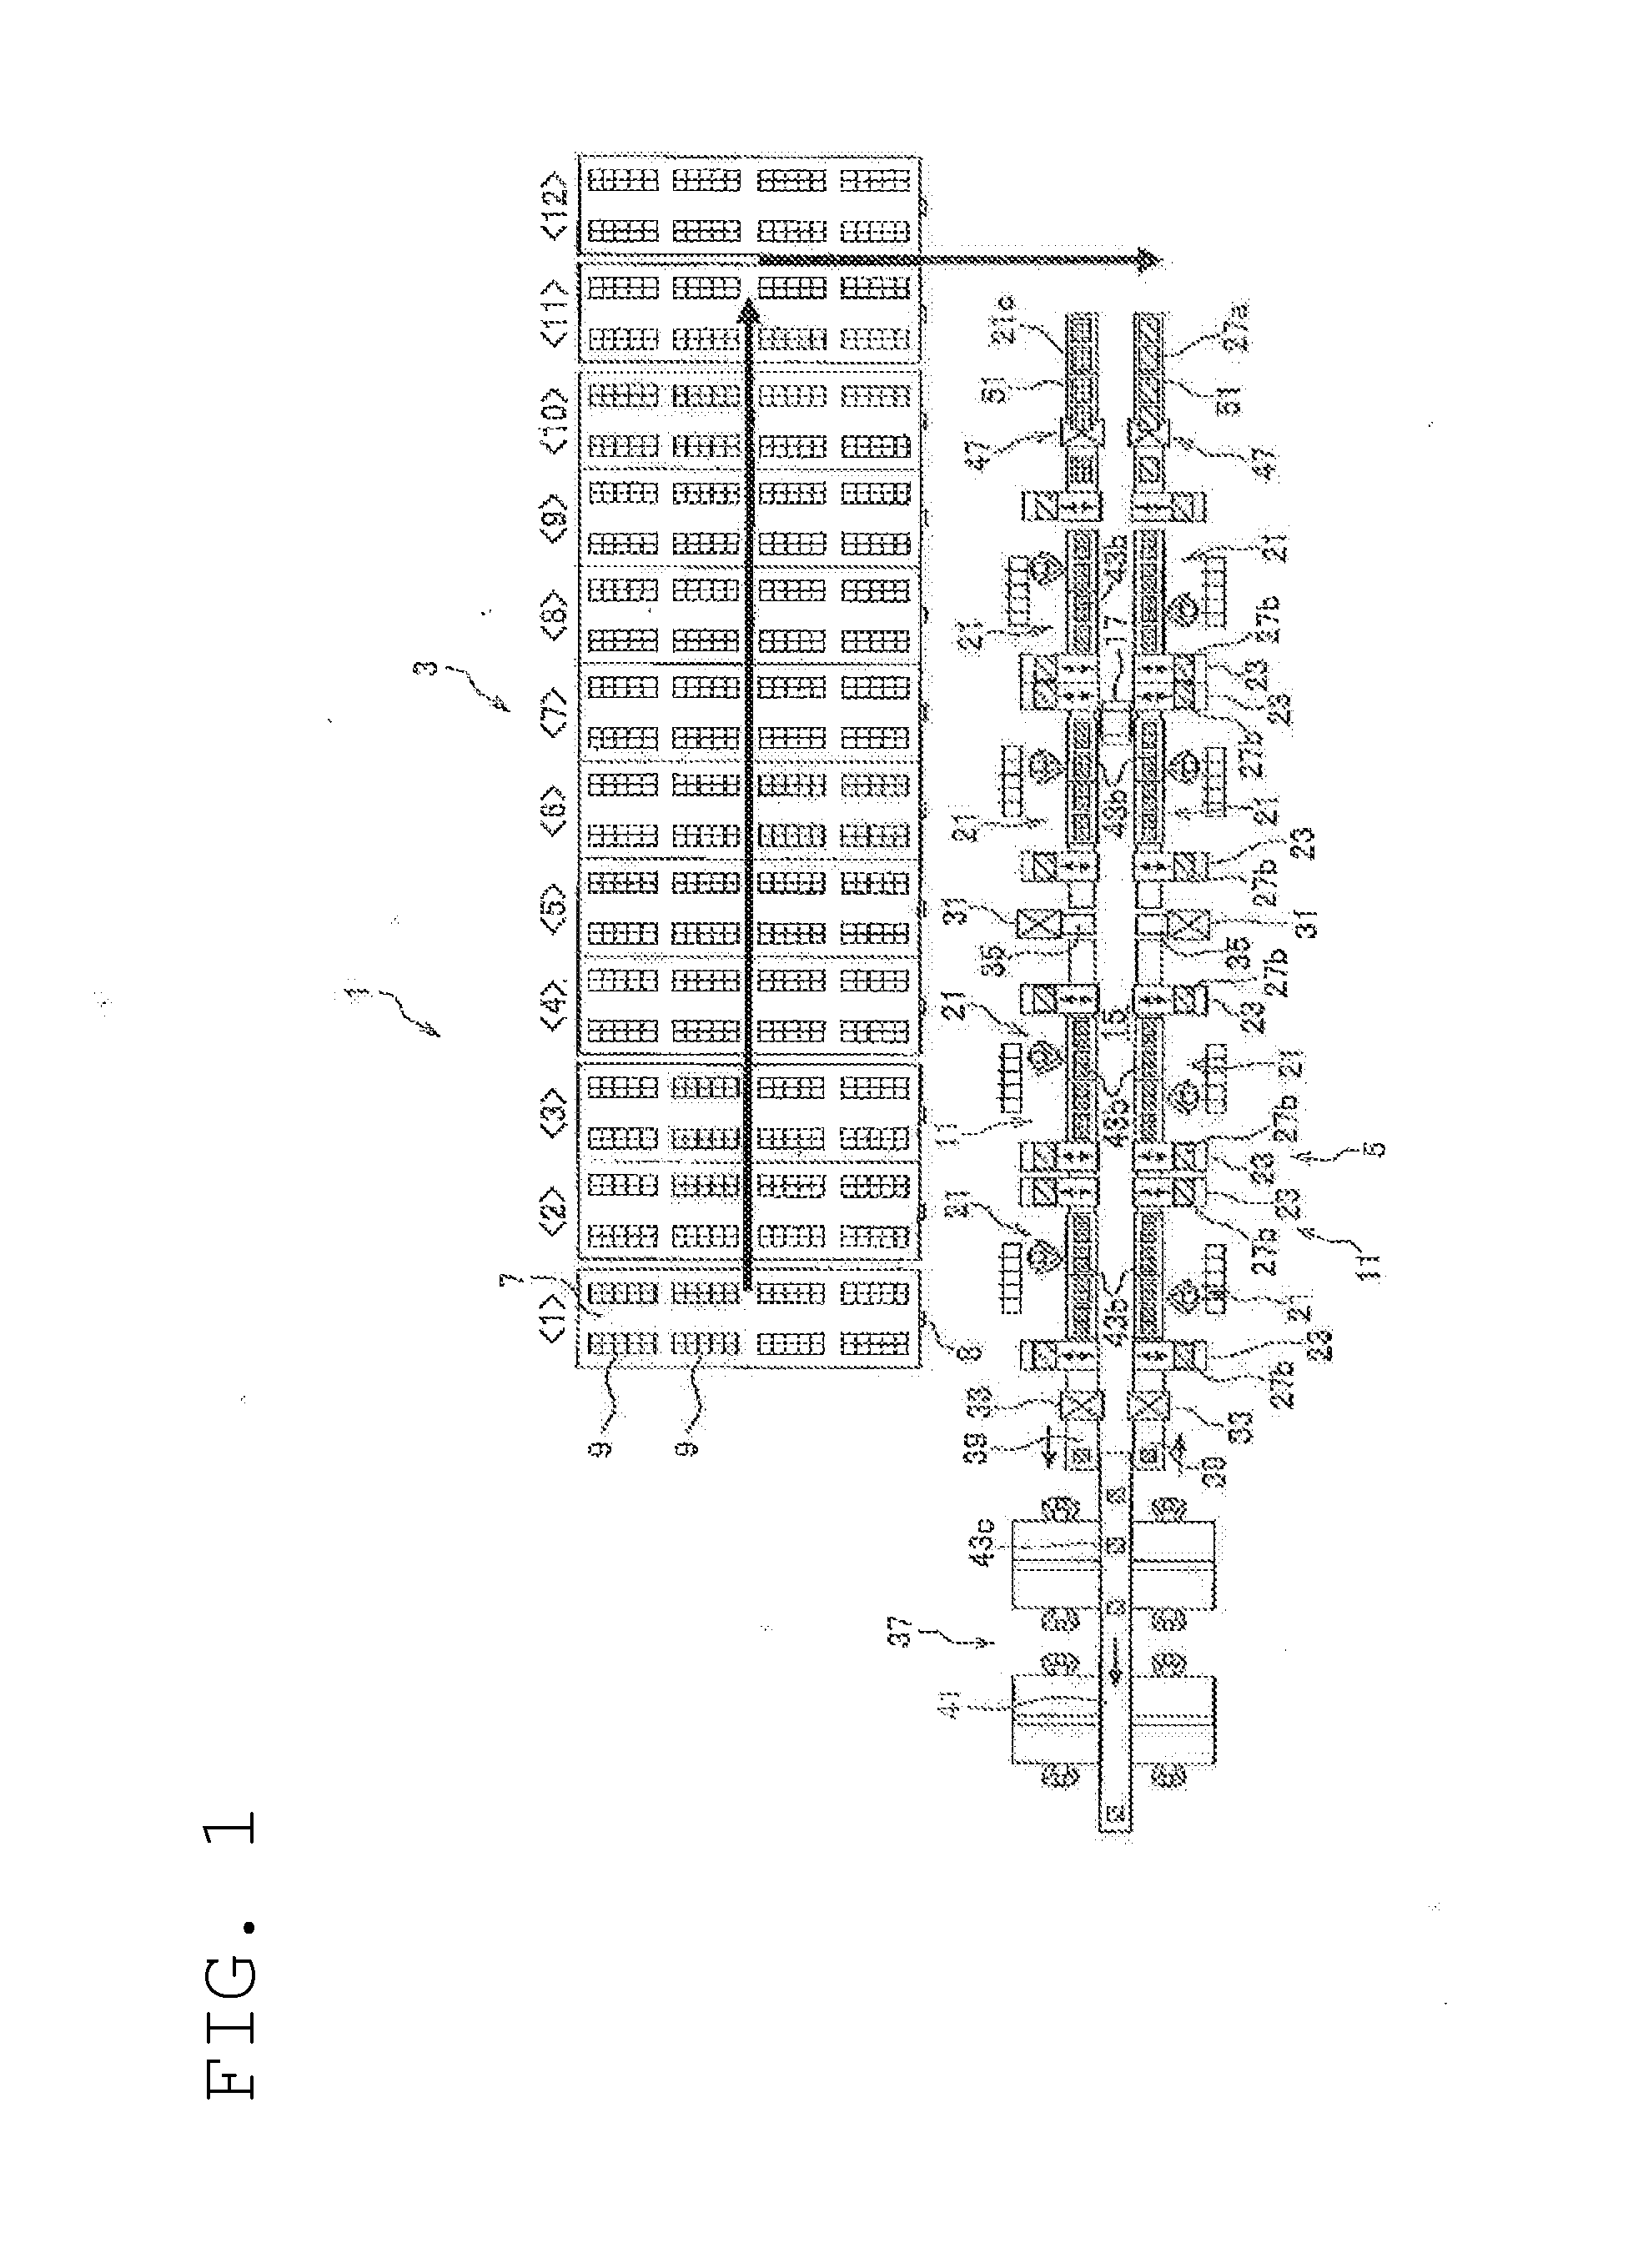 Picking and assorting system